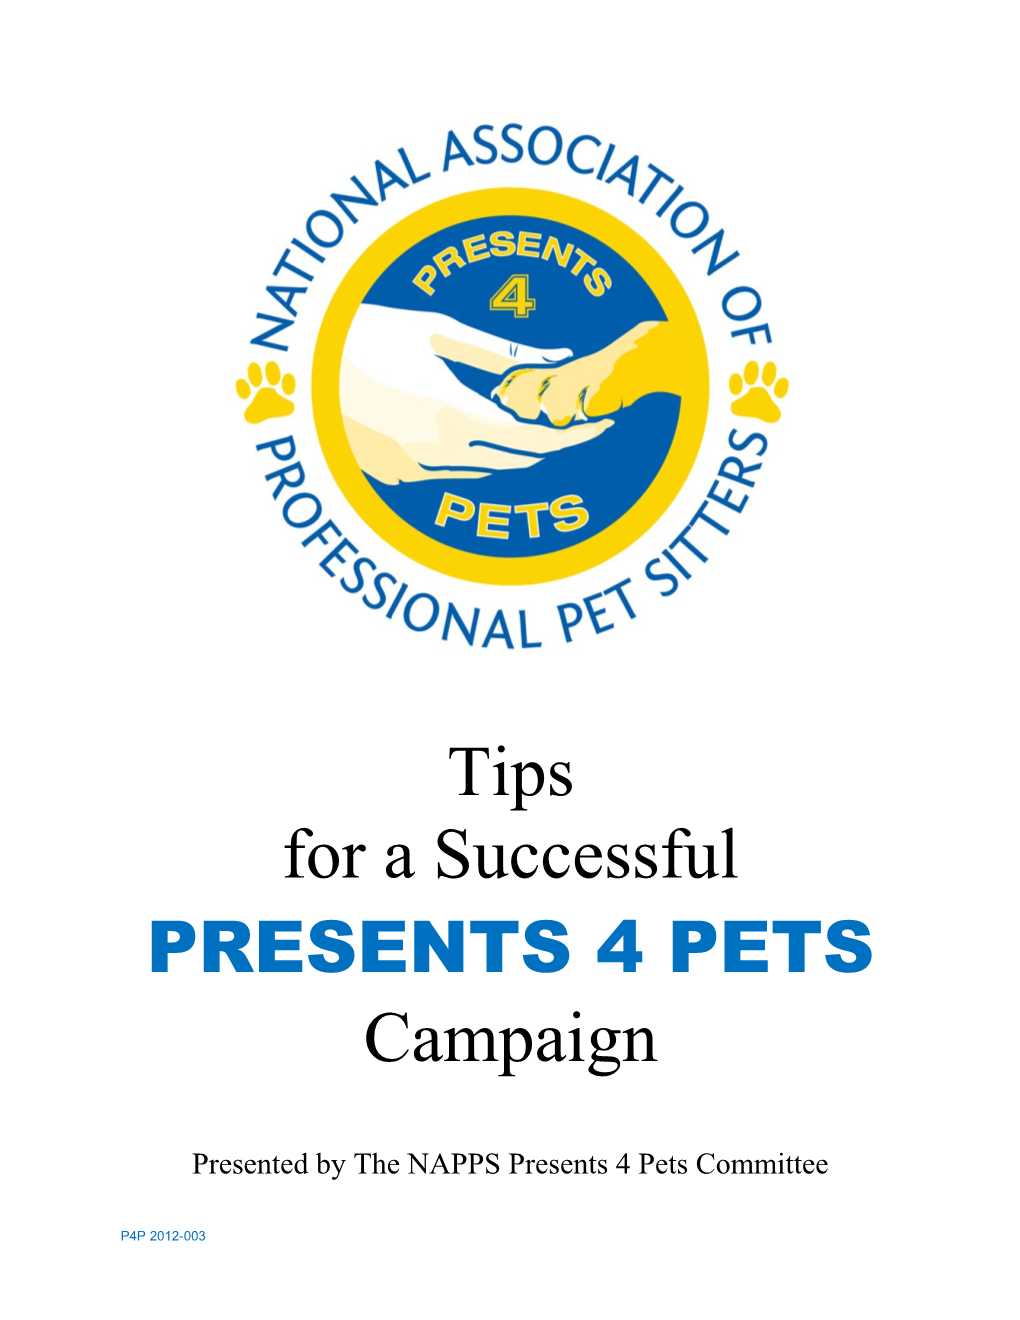 Presented by the NAPPS Presents 4 Pets Committee